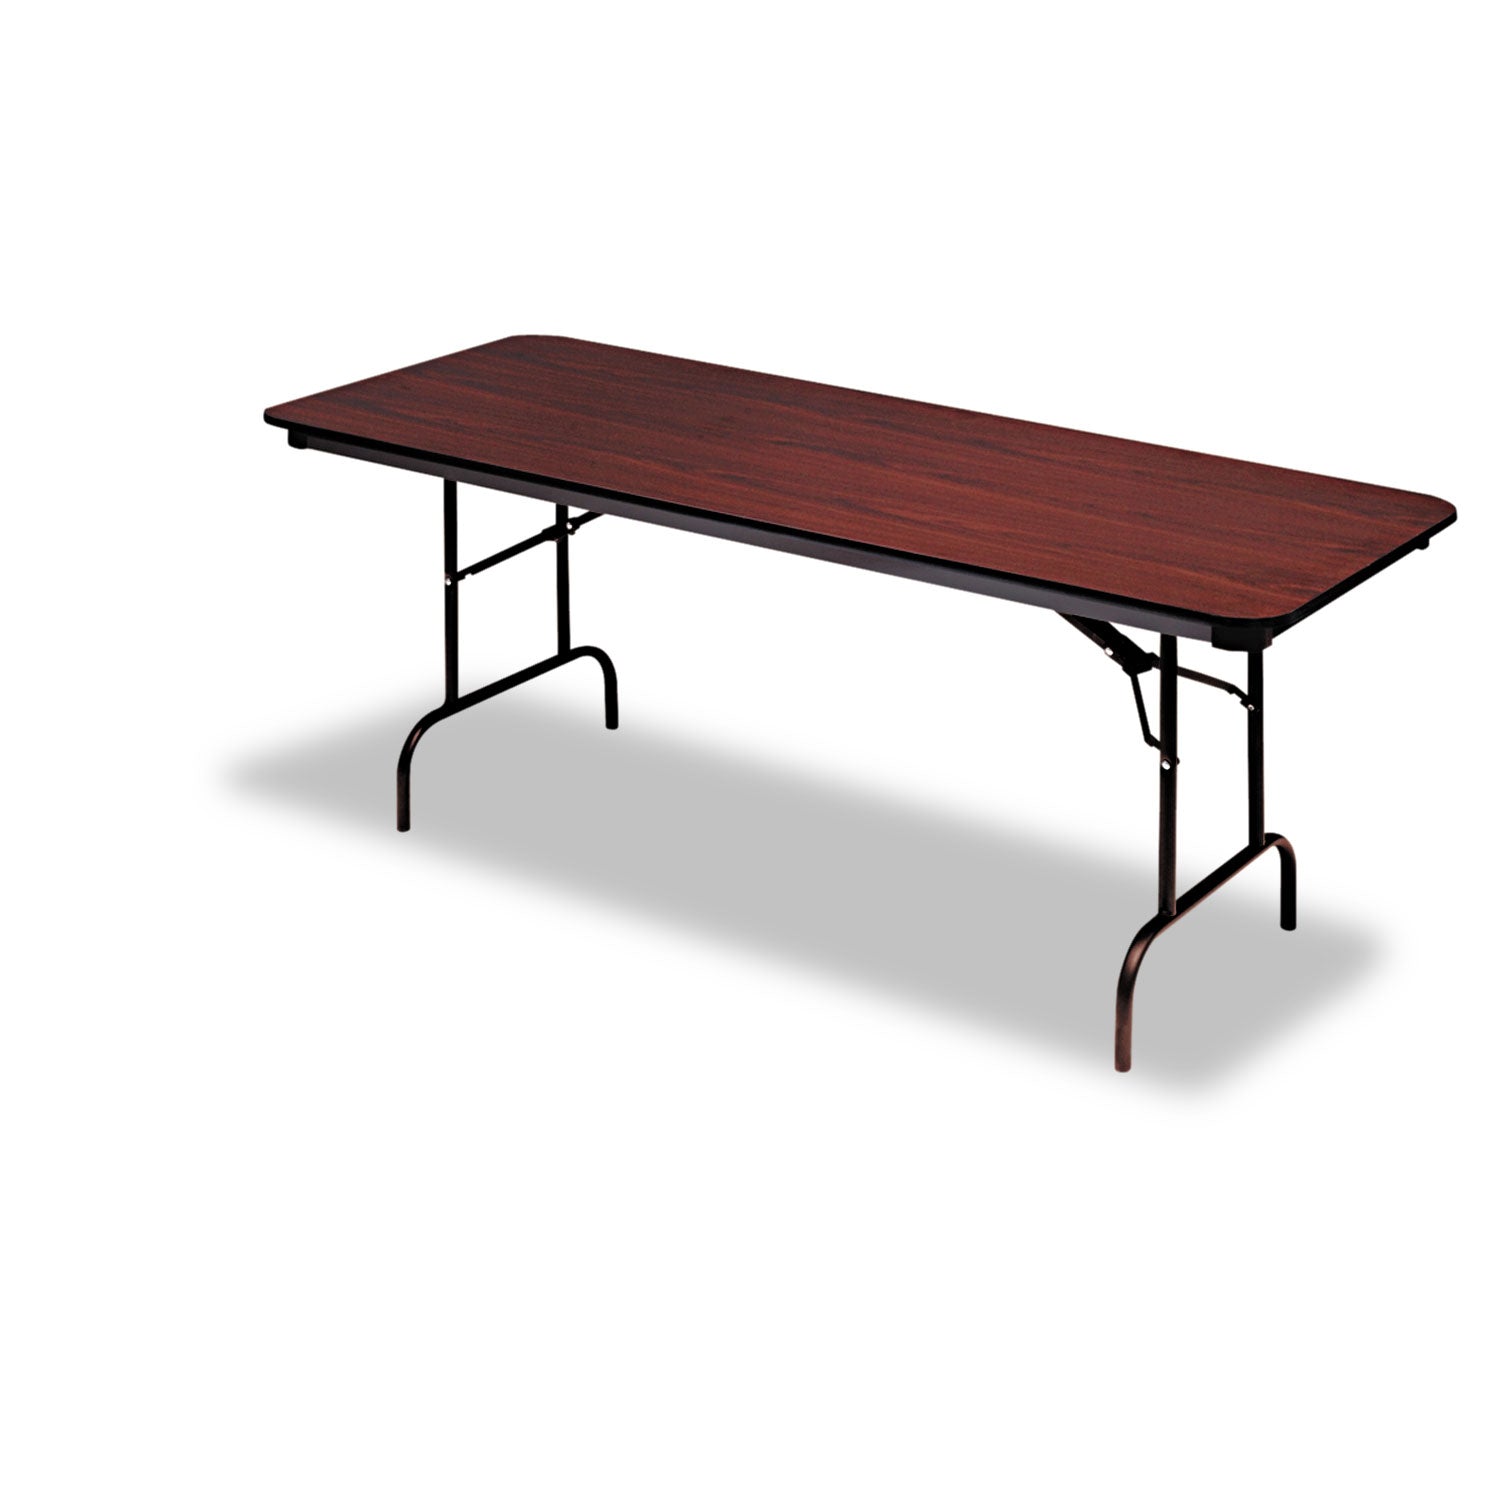 Iceberg Premium Wood Laminate Folding Table - For - Table TopMelamine Rectangle Top - Traditional Style - 300 lb Capacity - 60" Table Top Length x 30" Table Top Width x 0.75" Table Top Thickness - 29" Height - Mahogany - 1 Each - 1